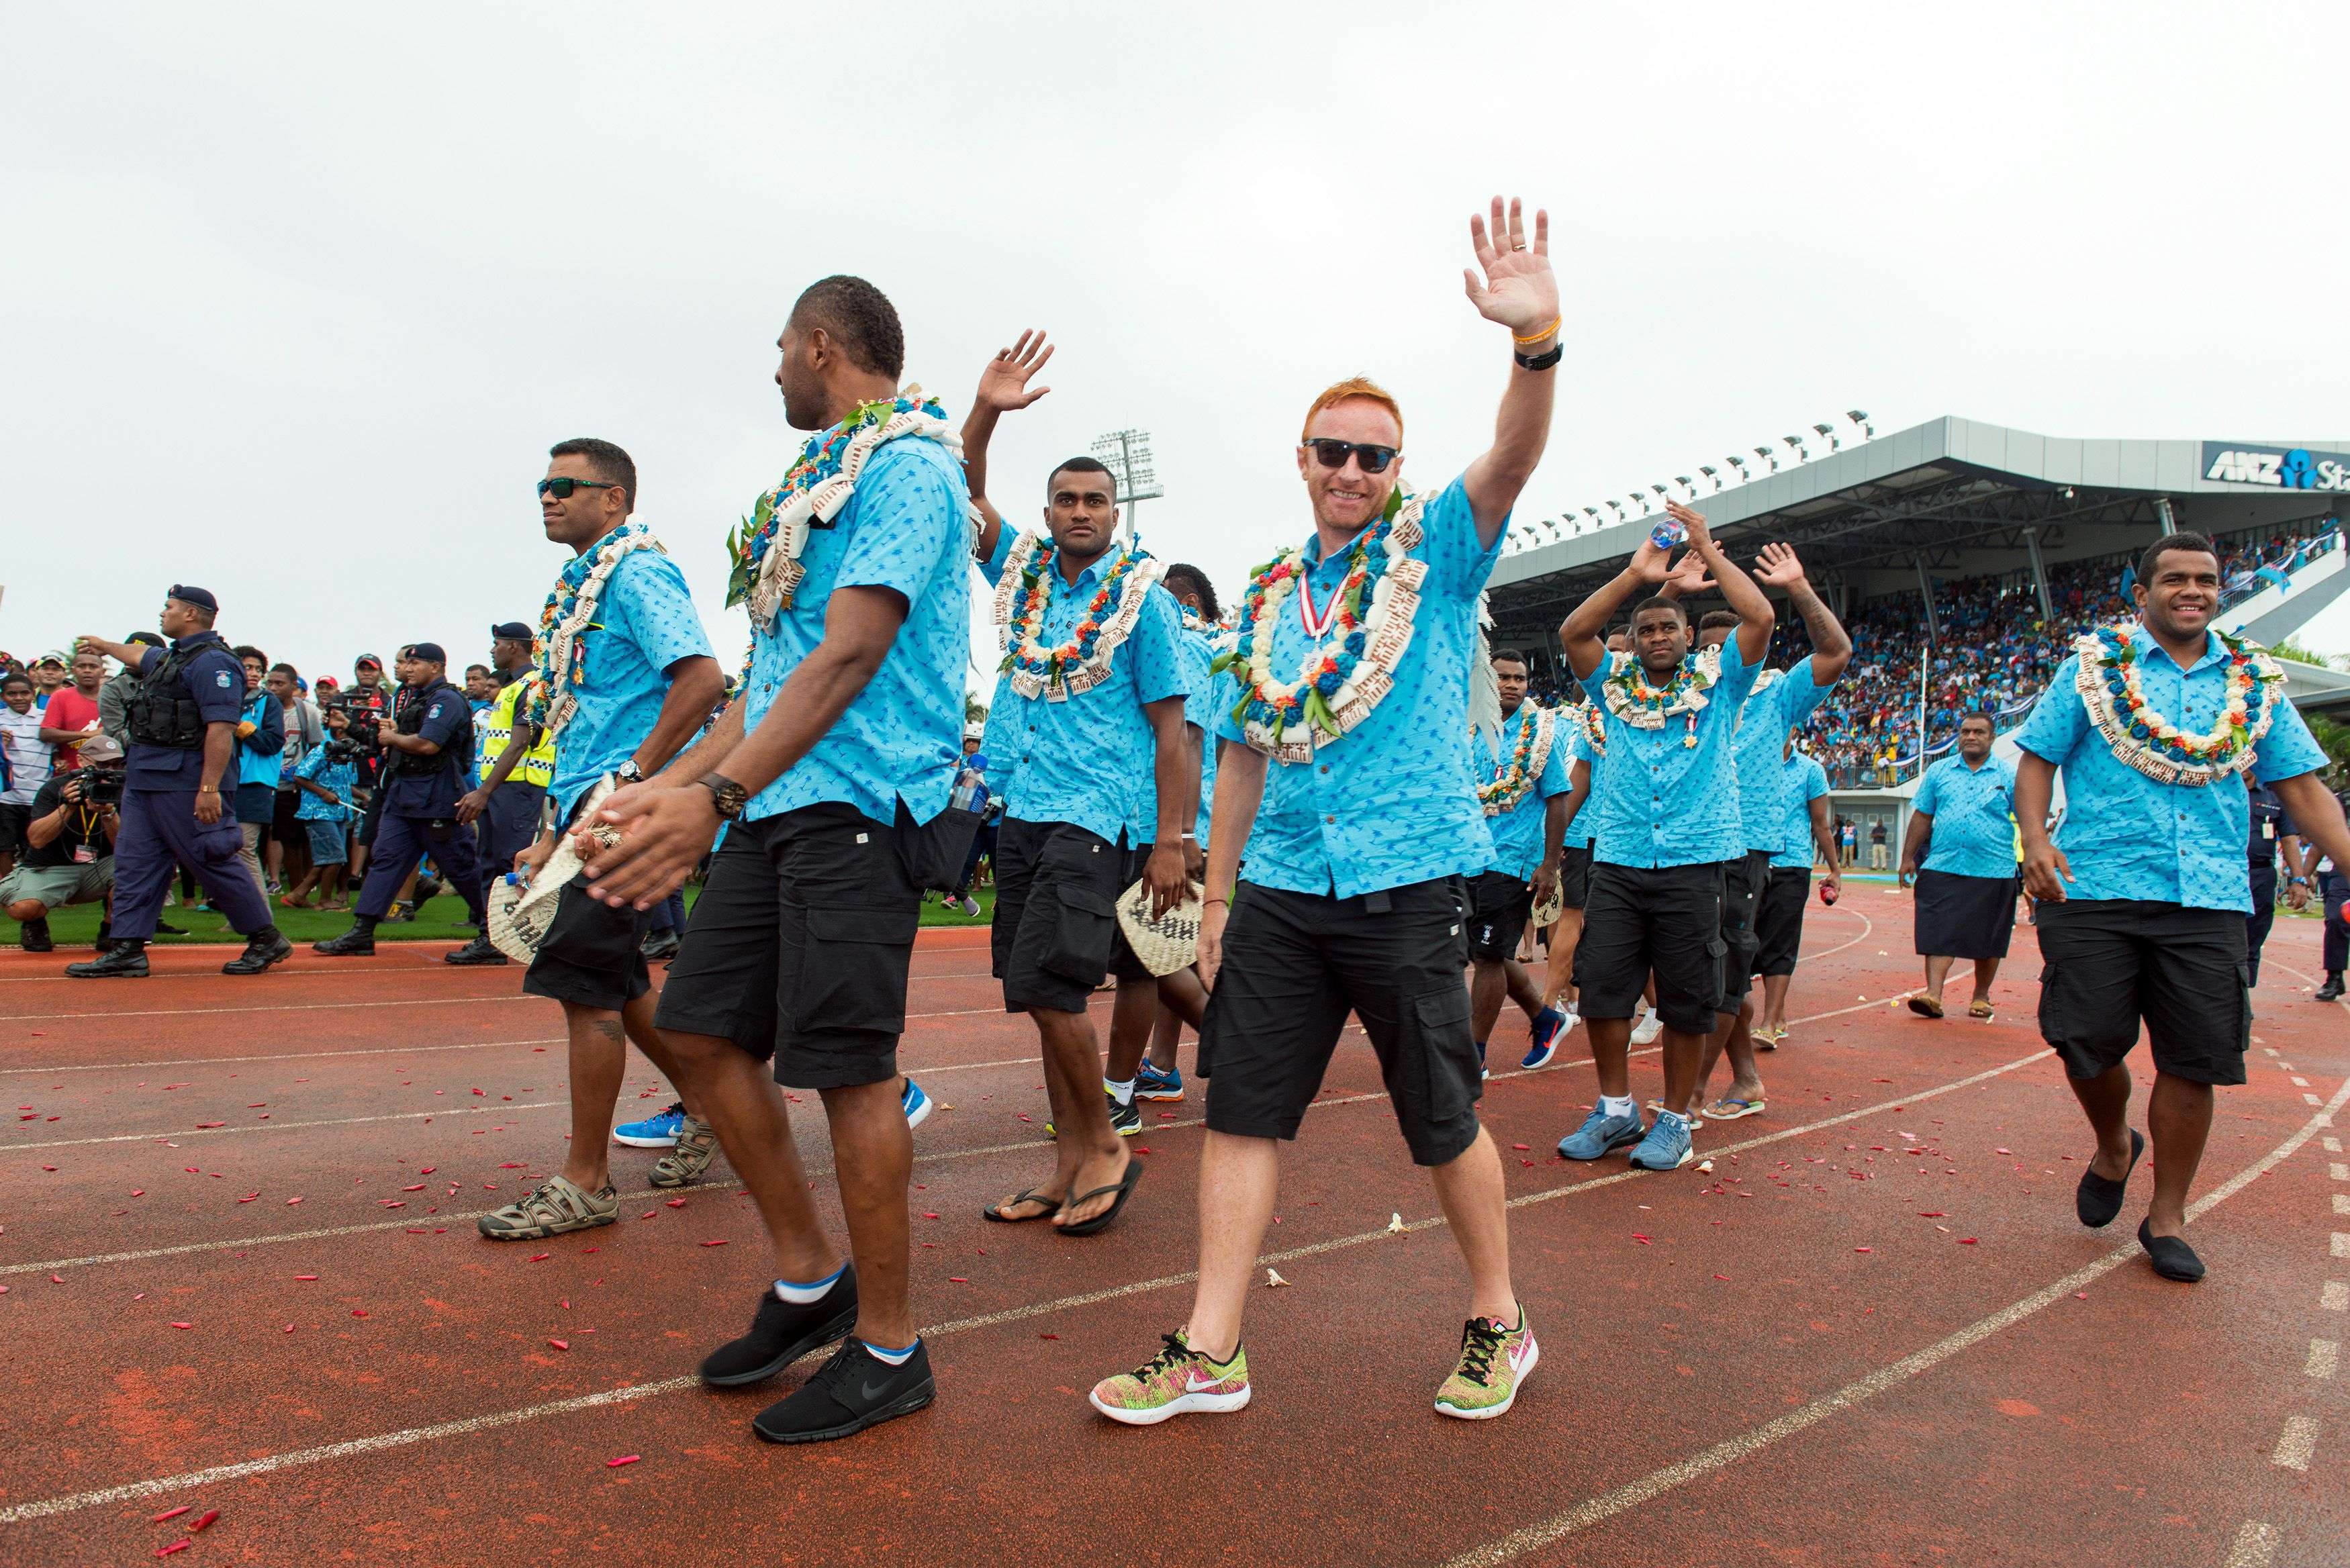 Fiji's rugby sevens coach Ben Ryan waving to the crowd during a victory ceremony. Photo: AFP